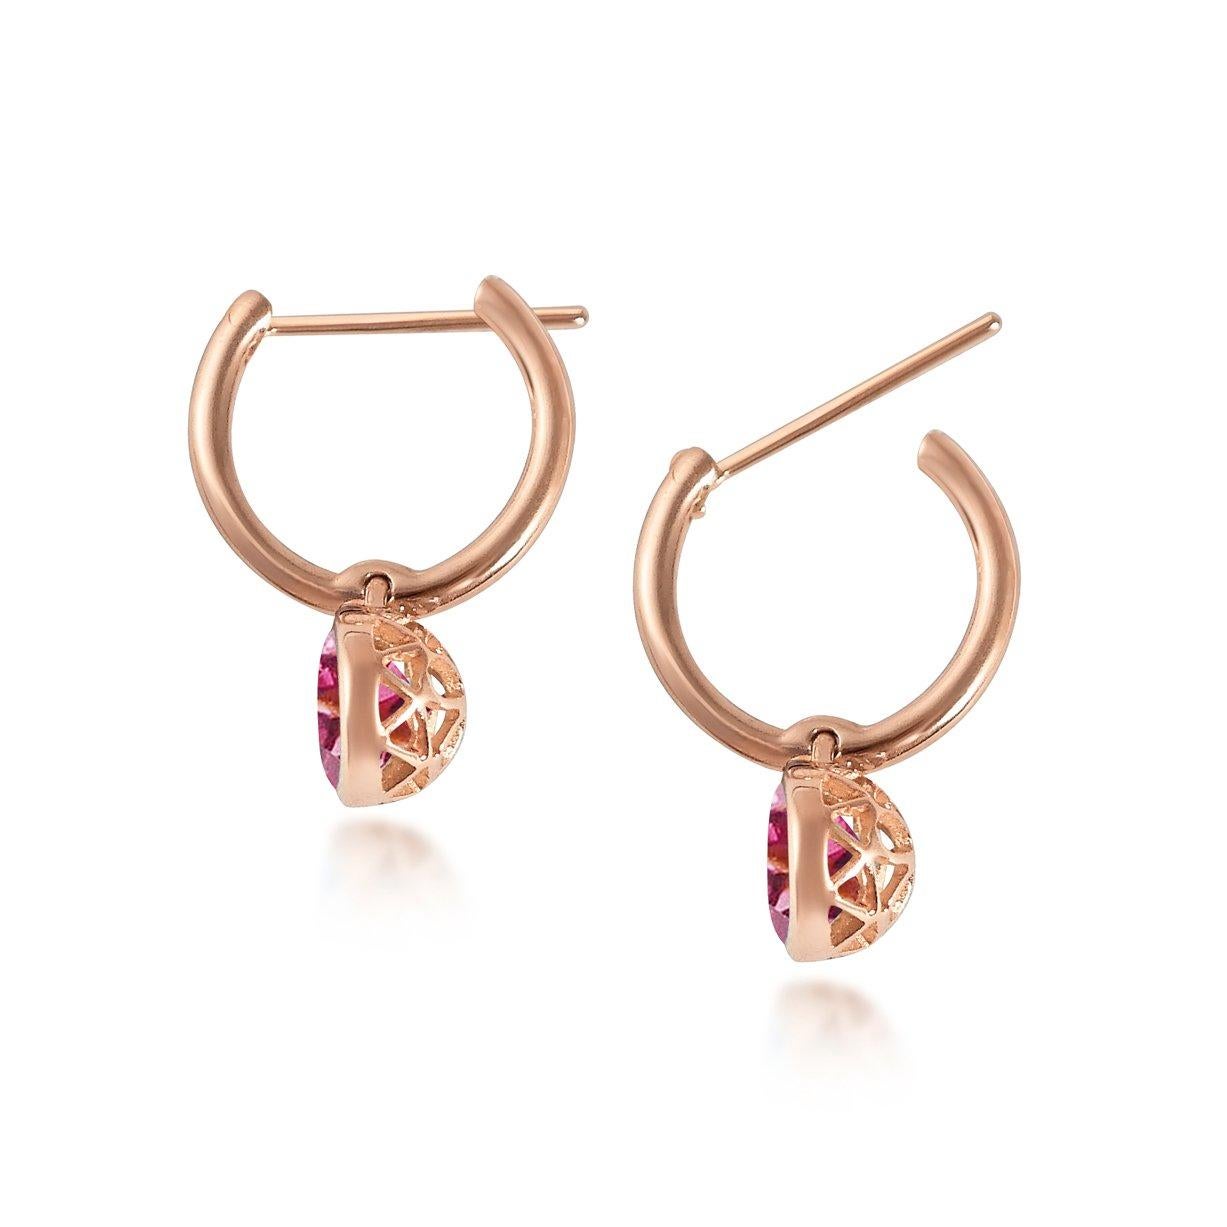 Handcrafted 2.60 Carats Pink Tourmaline 18 Karat Rose Gold Drop Earrings. The 8mm natural stones are set in our iconic hand pierced gold lace to let the light through. Our precious and fine stones on our dangling earrings are highlighted by a